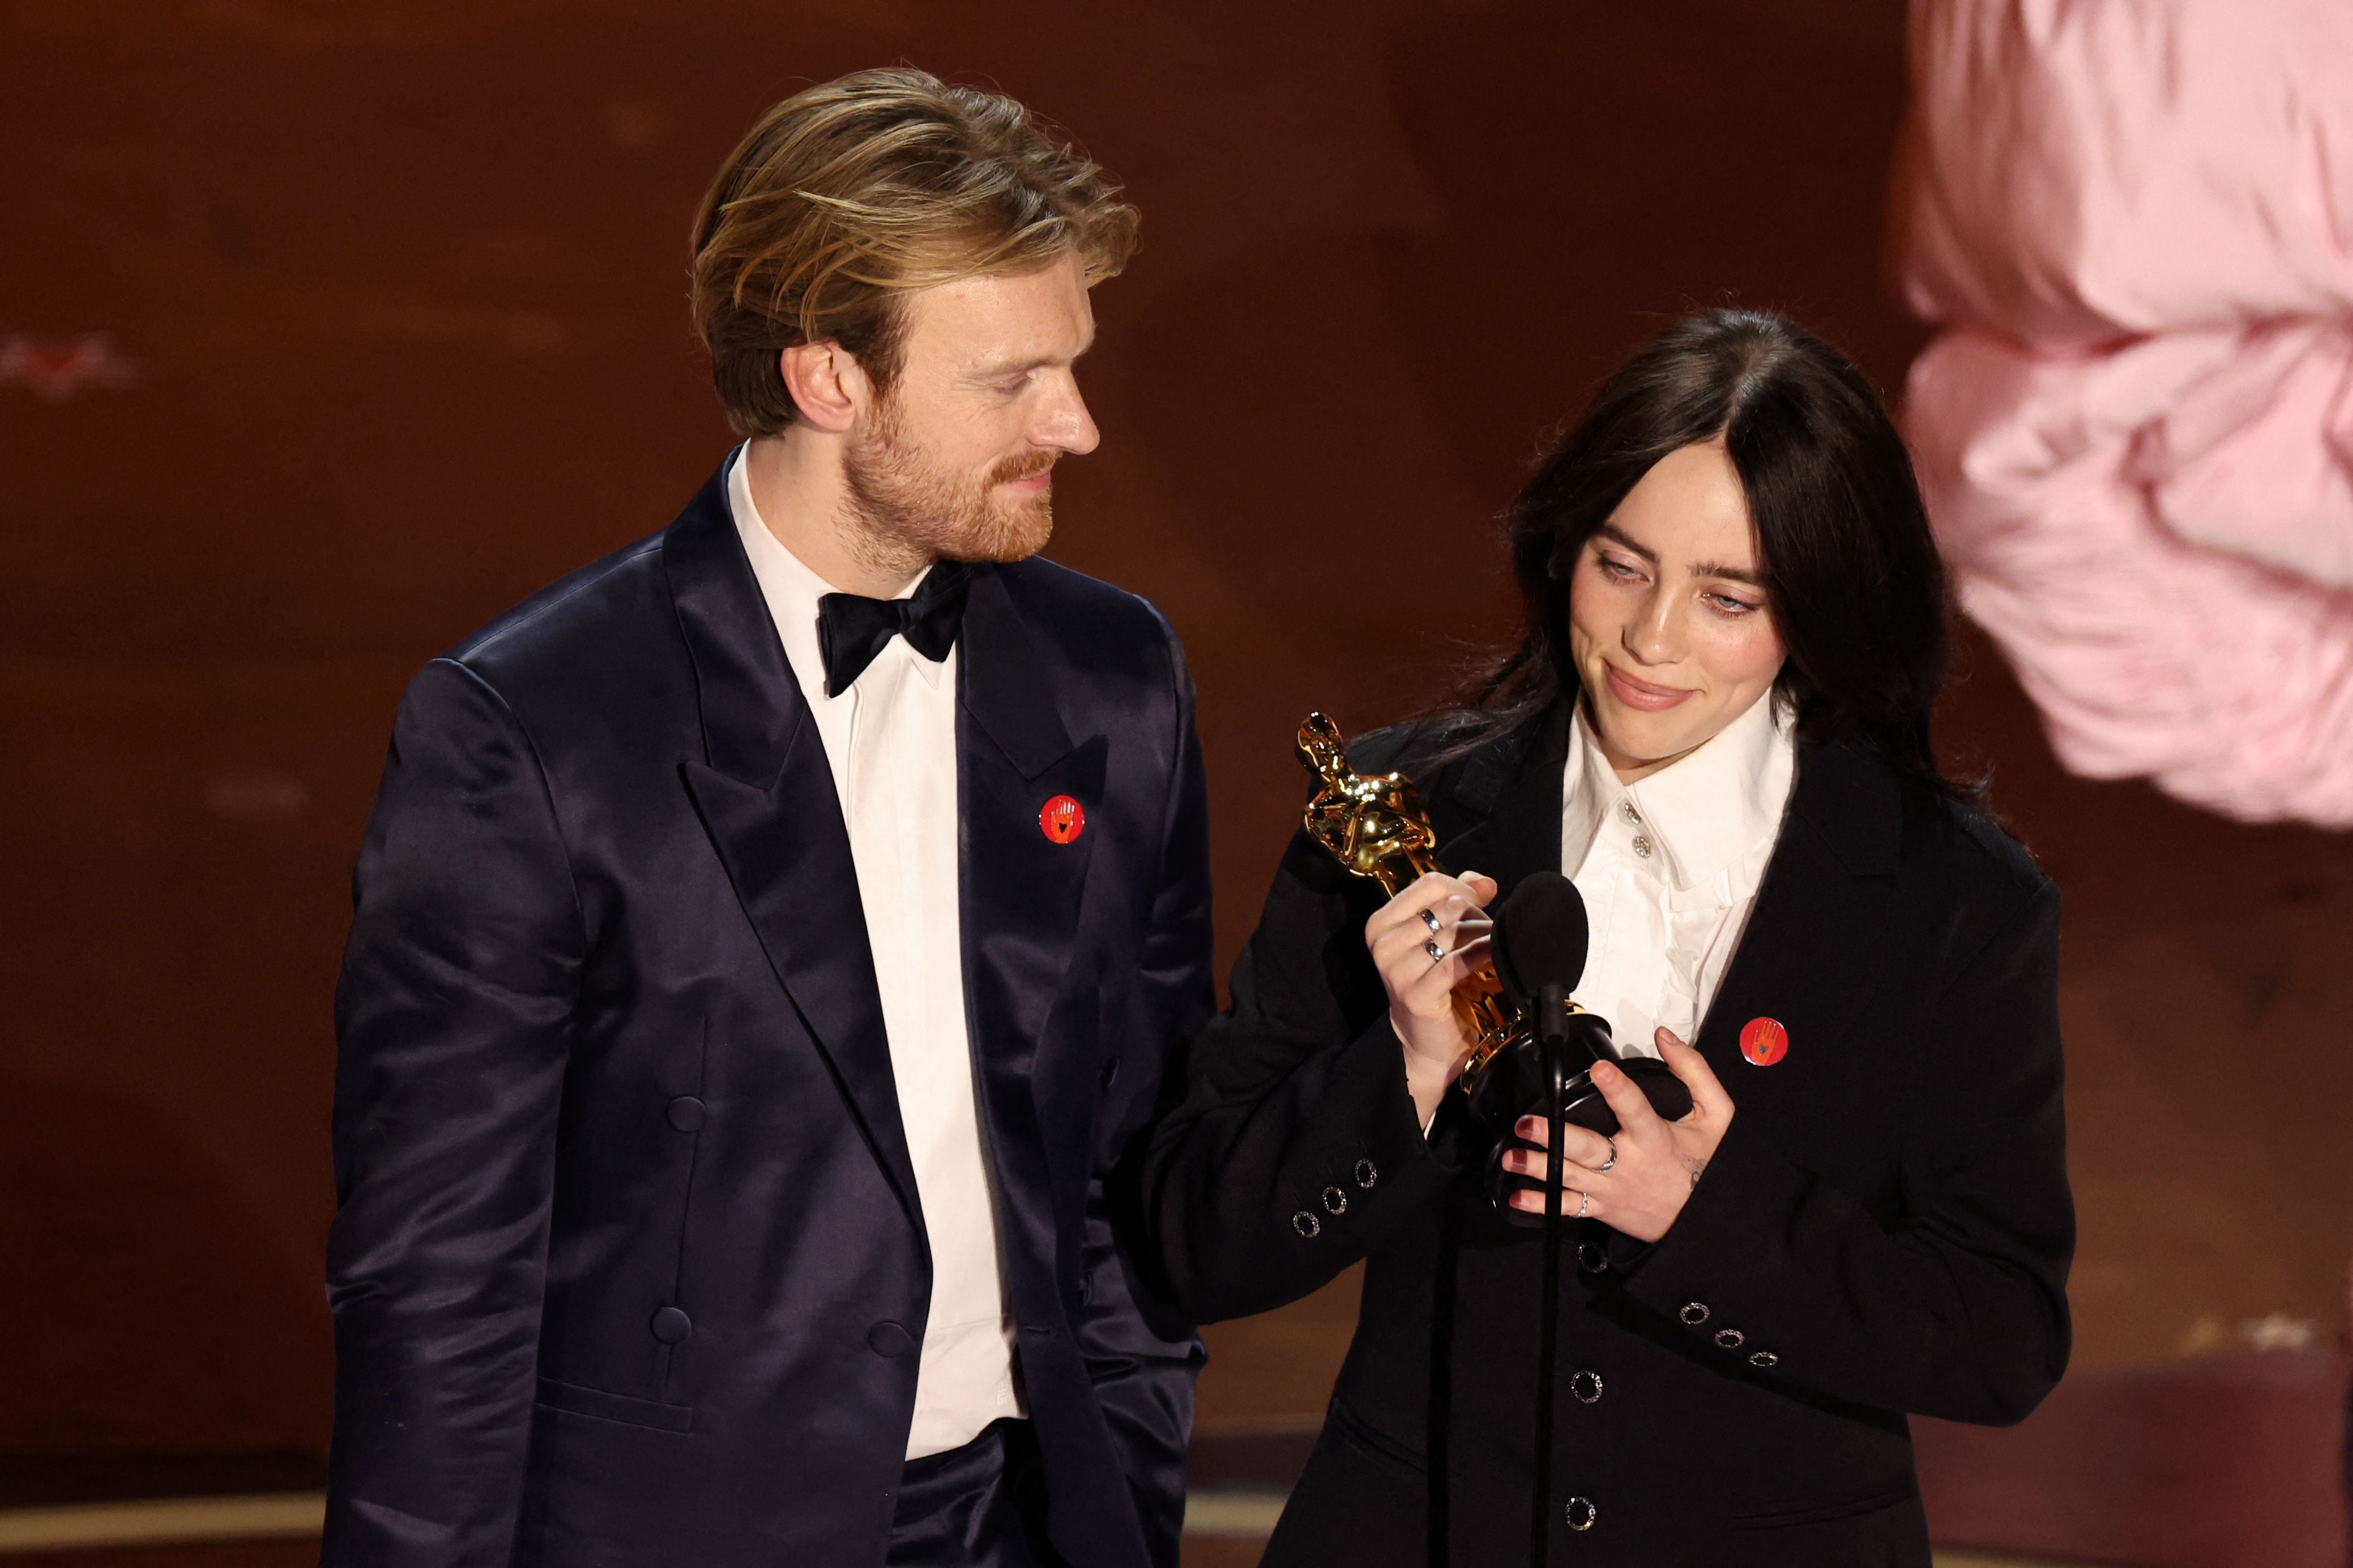 Billie Eilish and Finneas O'Connell win the Oscar for Best Original Song for "What Was I Made For?" from "Barbie" during the Oscars show at the 96th Academy Awards in Hollywood, Los Angeles, California, U.S., March 10, 2024. REUTERS/Mike Blake